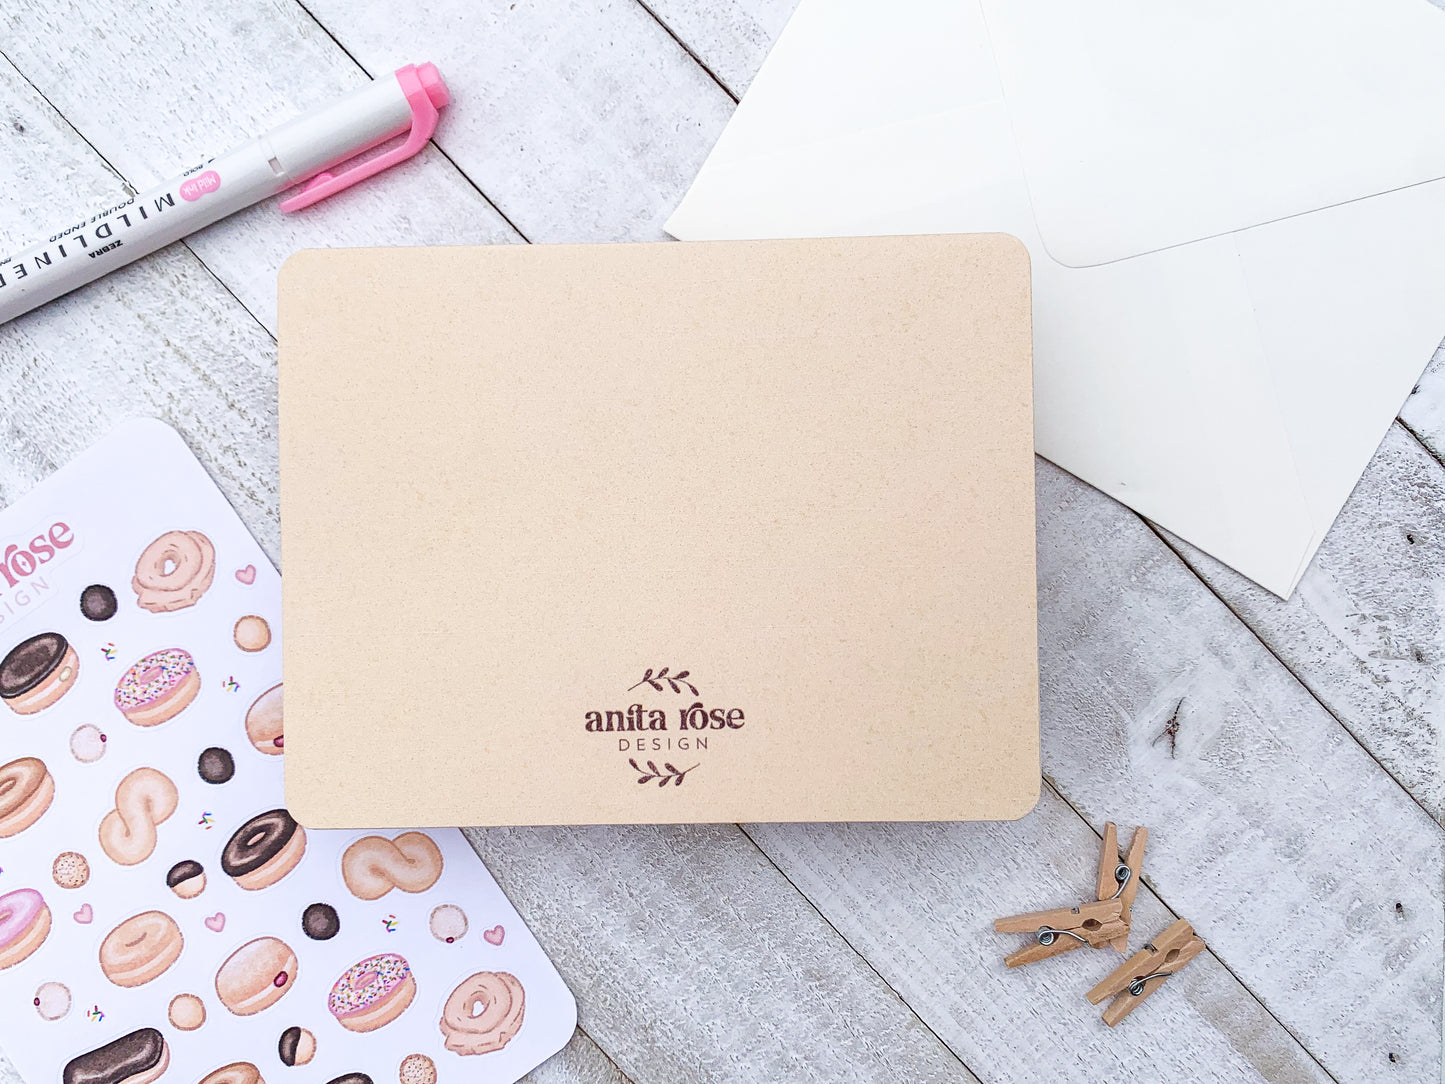 "I Donut Know What I'd Do Without You" Greeting Card